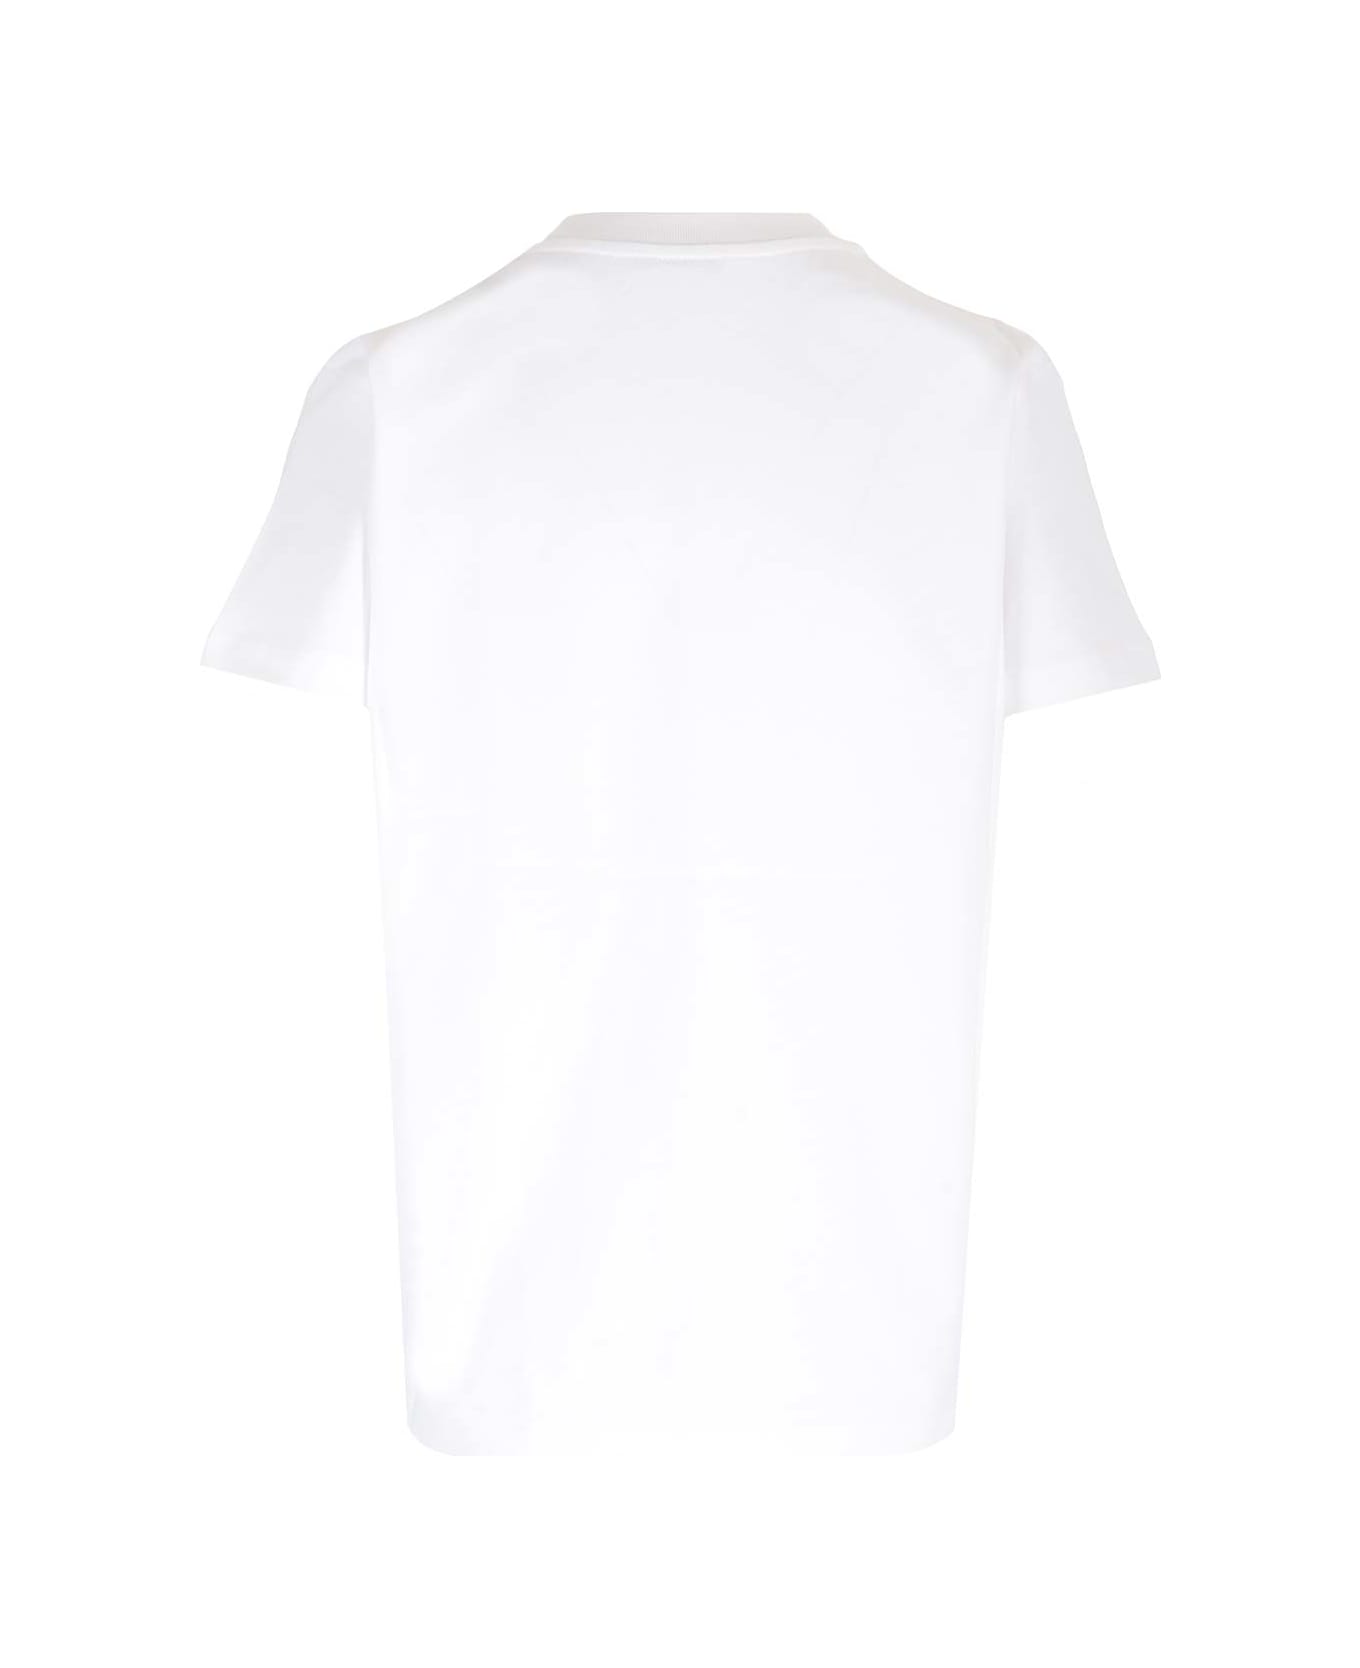 Moncler Embroidered T-shirt - White Tシャツ